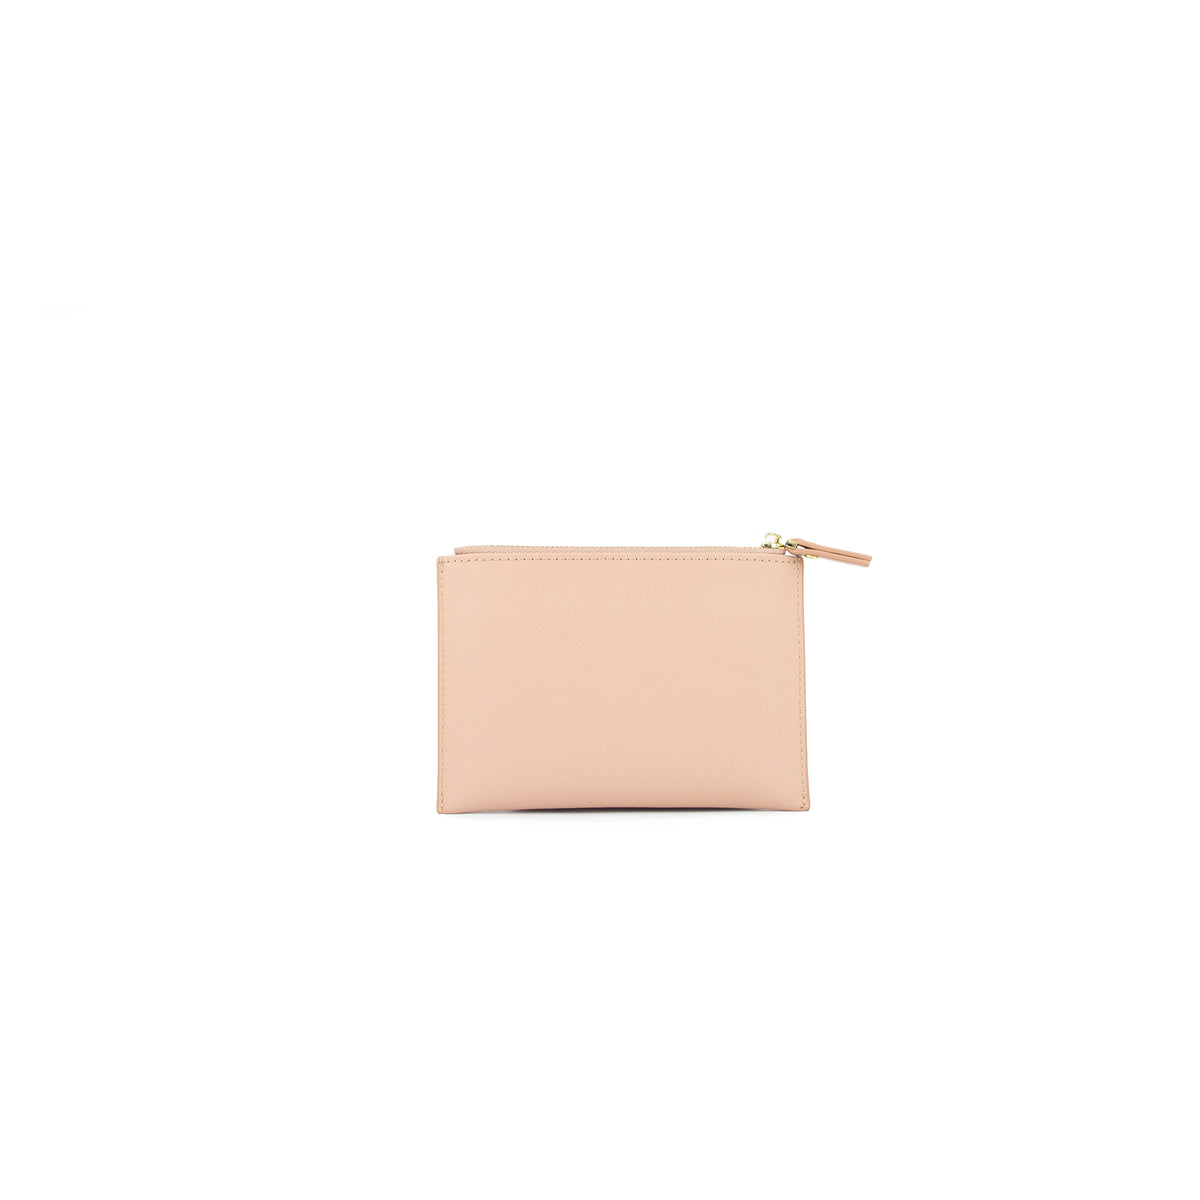 Personalised Coin Purse - Nude Saffiano Leather